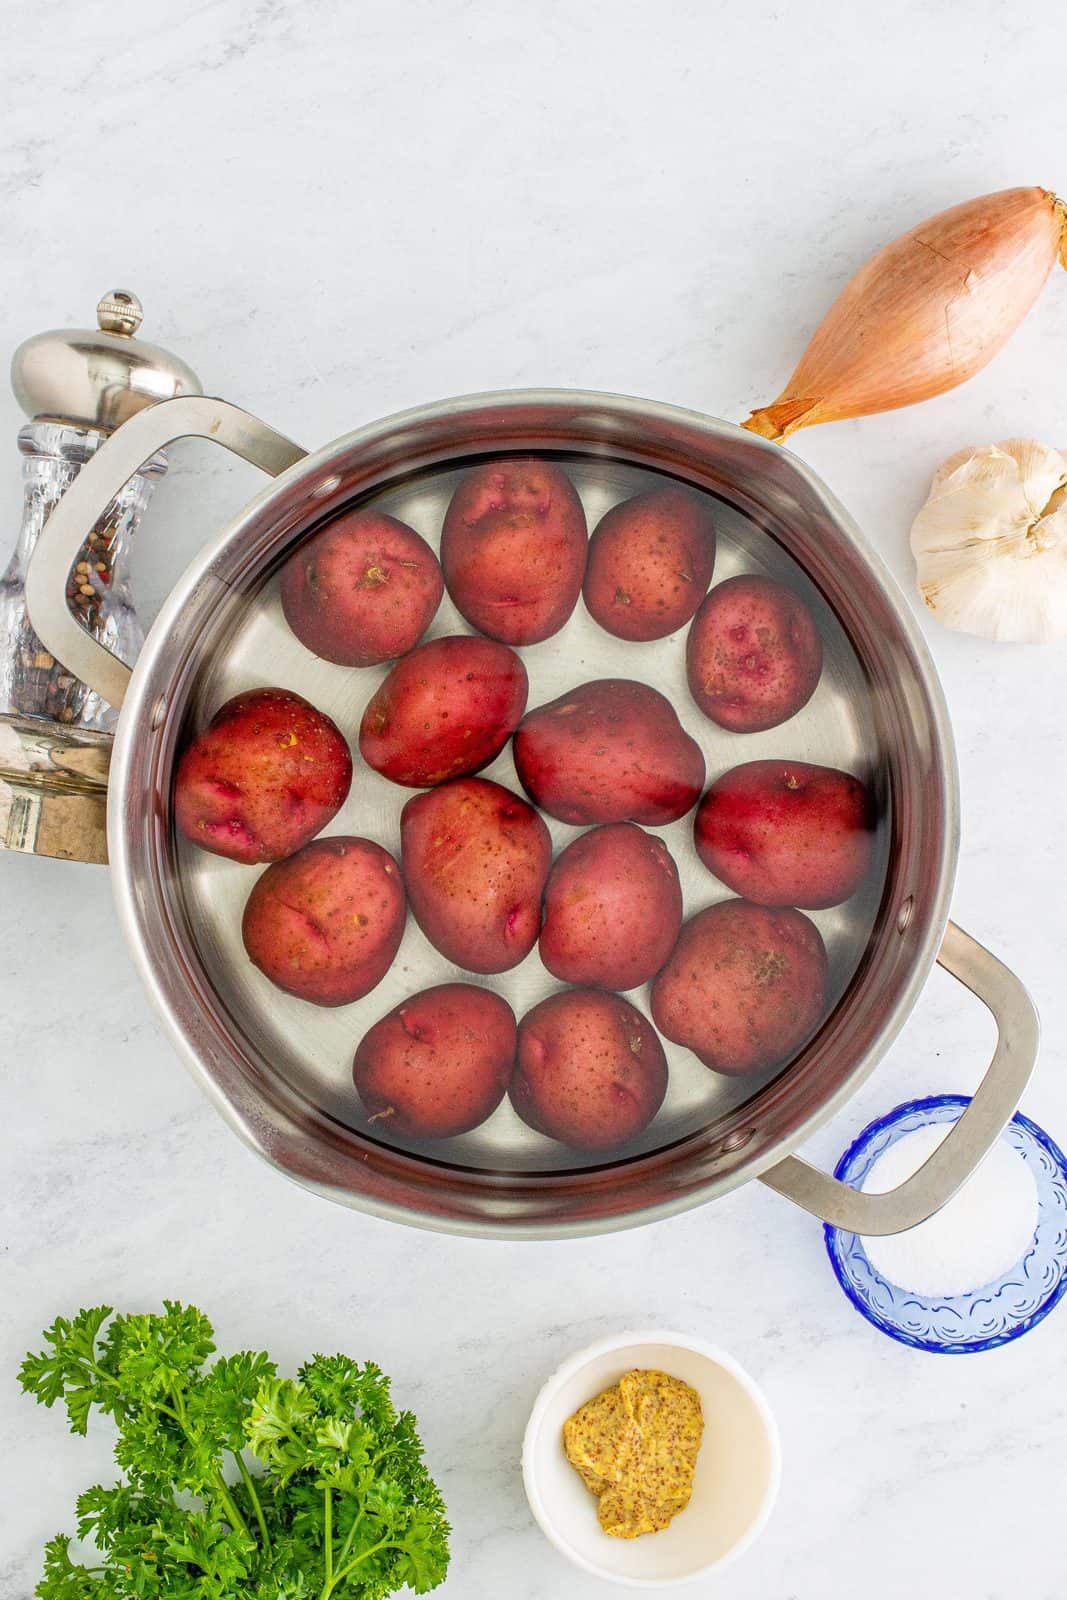 Red potatoes in water in pan.